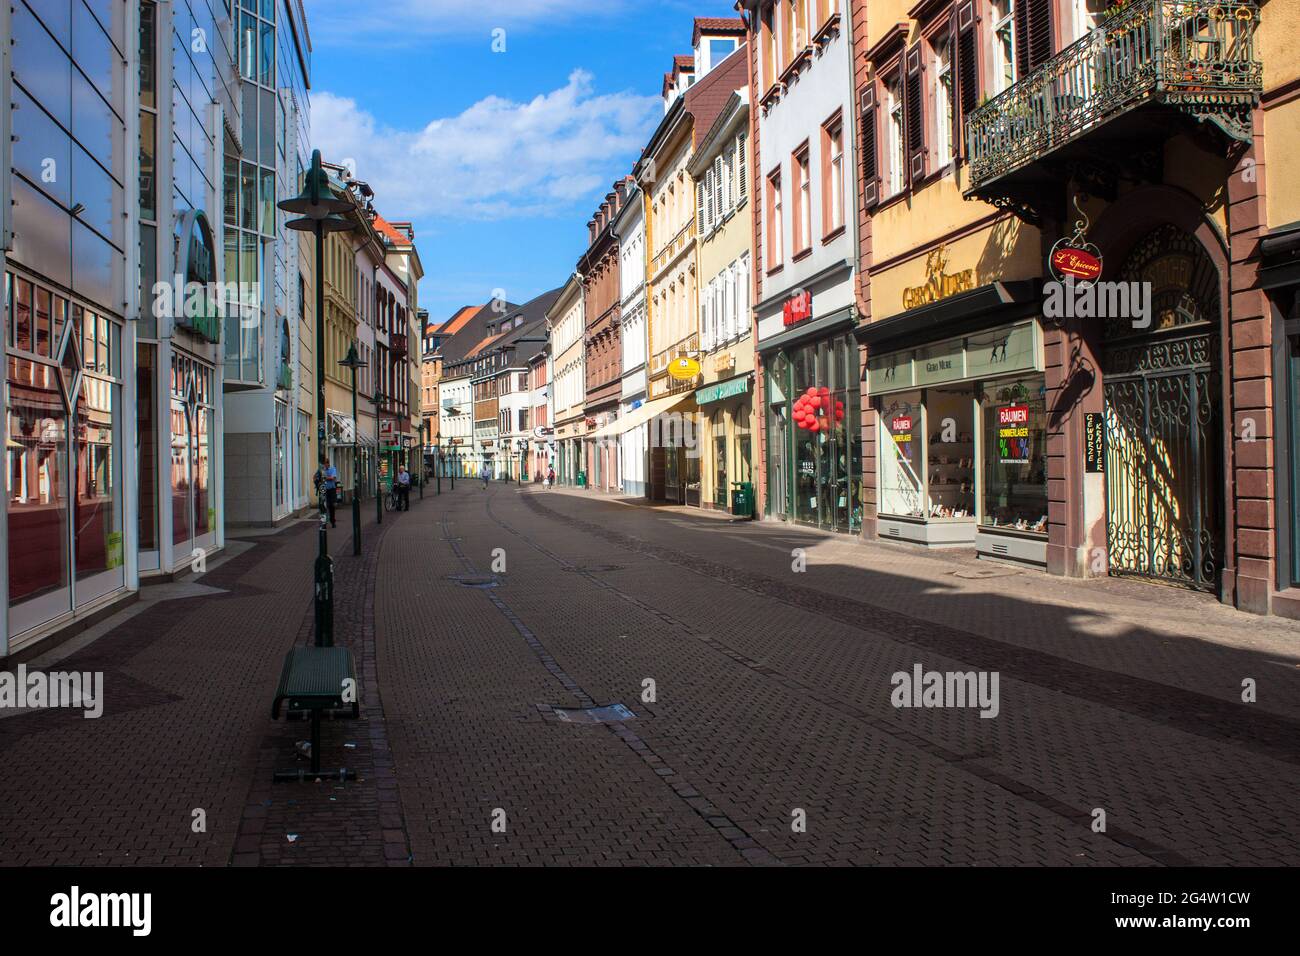 HEIDELBERG, GERMANY - AUGUST 4: Hauptstrasse in the old town of Heidelberg, Germany, on August 4, 2013. Heidelberg is one of the most popular tourist Stock Photo